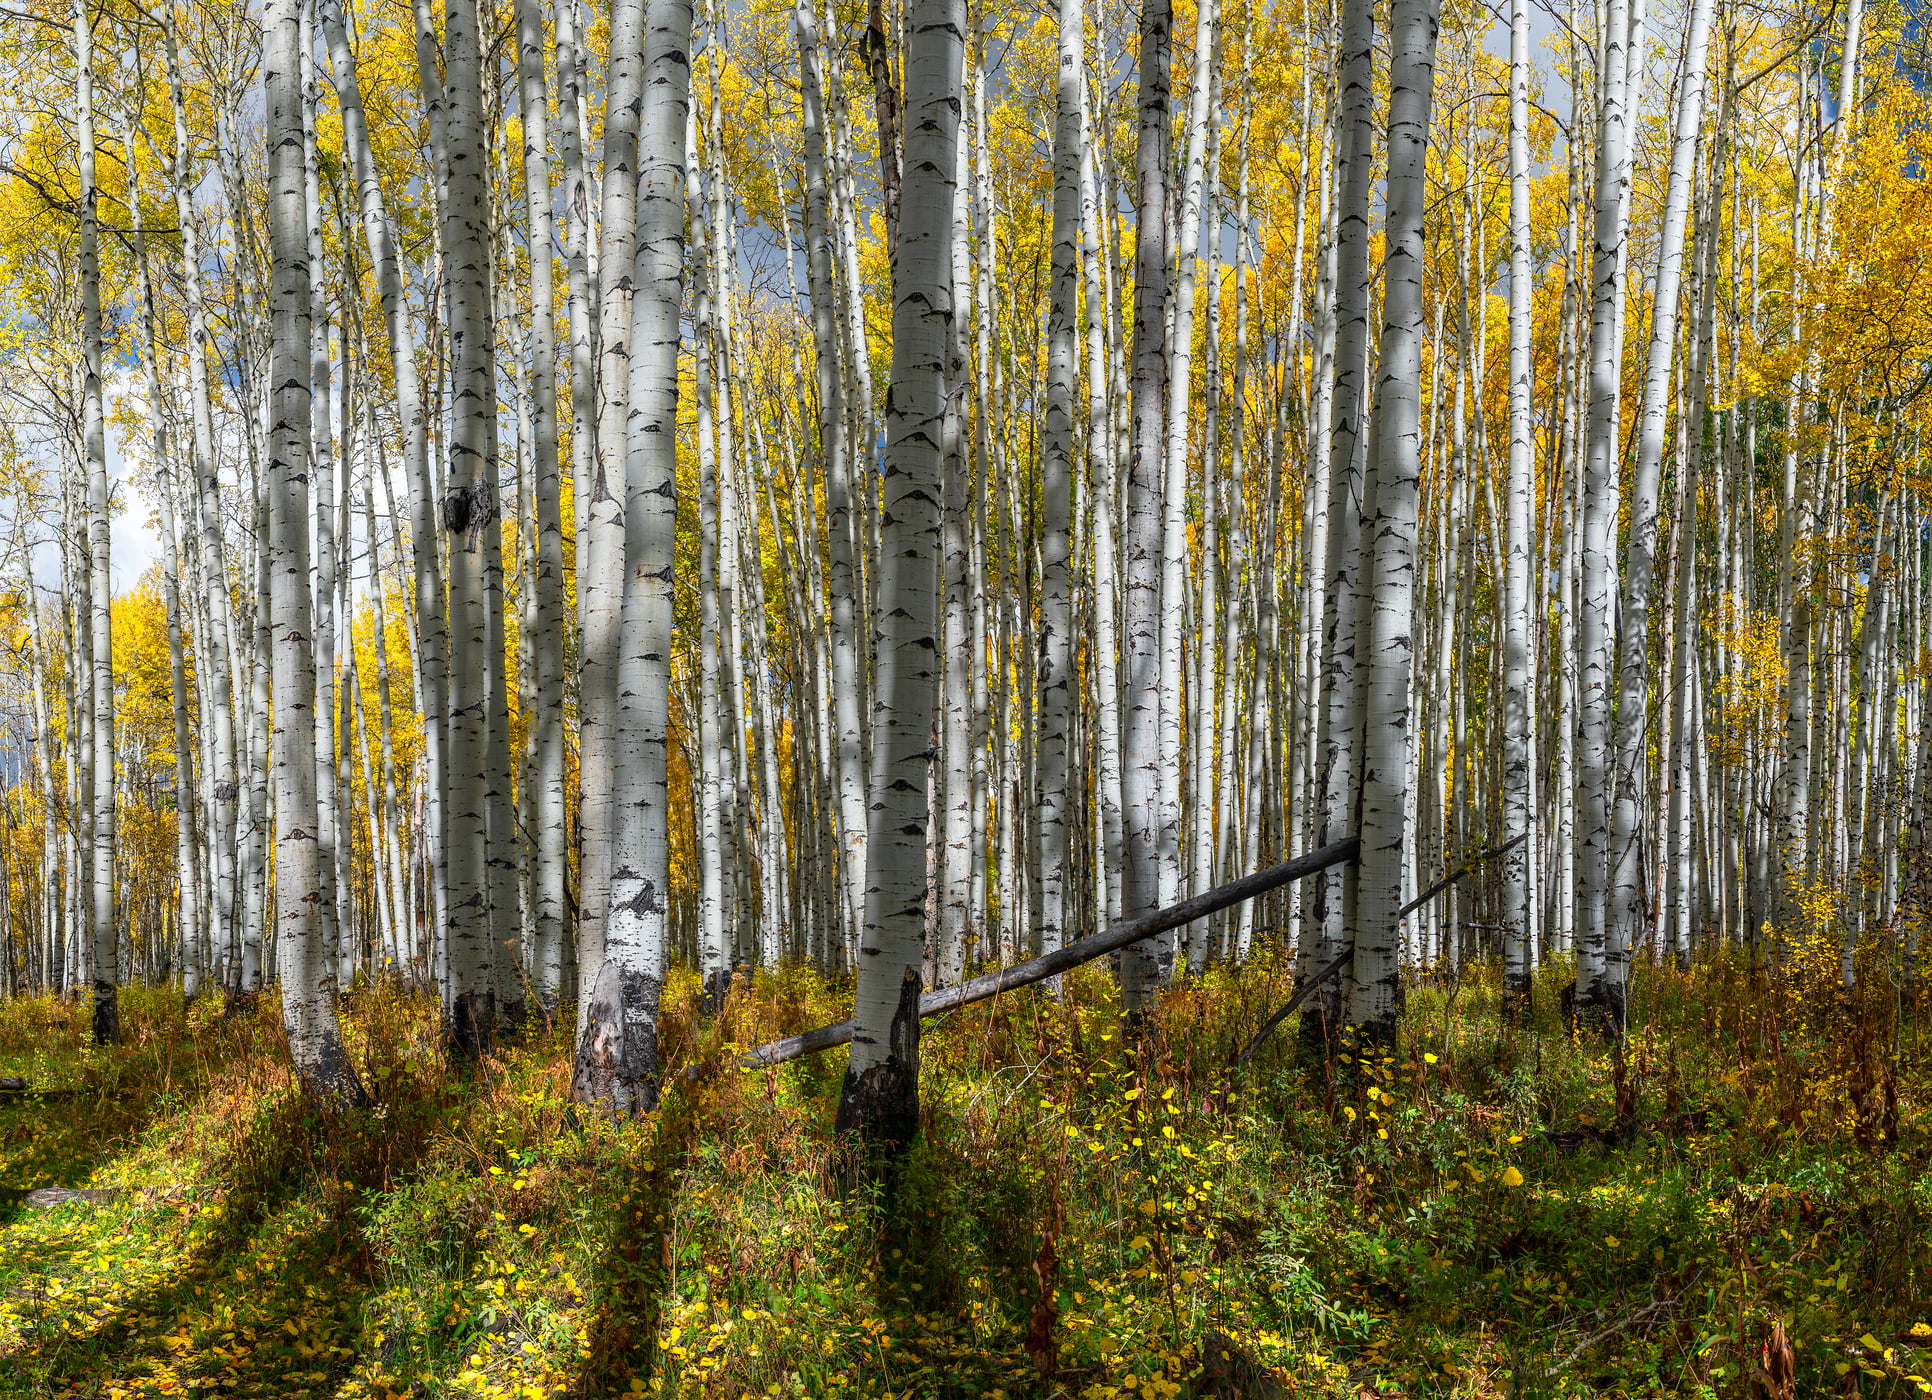 605 megapixels! A very high resolution, large-format VAST photo print of an aspen thicket; nature photograph created by Phillip Noll in Mancos, Colorado.